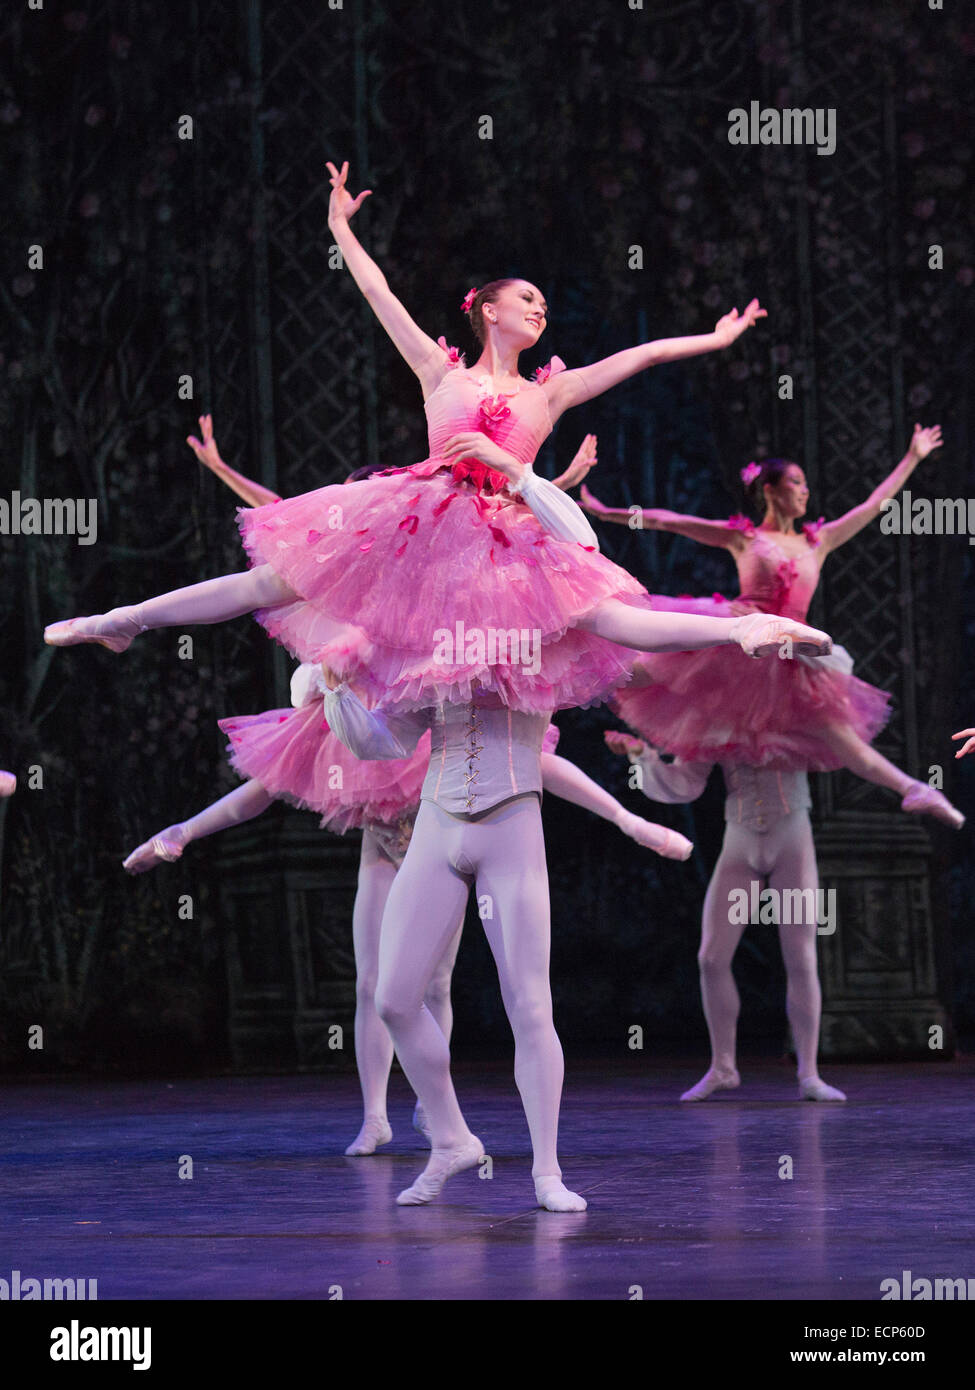 Waltz of the Flowers with dancers of the English National Ballet and Students from the English National Ballet School. Dress rehearsal for the ballet 'The Nutcracker' at the London Coliseum. Set to music by Pyotr Ilyich Tchaikovsky, the traditional Christmas ballet is choreographed by Wayne Eagling based on a concept by Toer von Schayk and Wayne Eagling. The English National Ballet Philharmonic orchestra accompanies dancers from the English National Ballet and Students from the English National Ballet School. Children performers are from the Tring Park School for the Performing Arts. Stock Photo